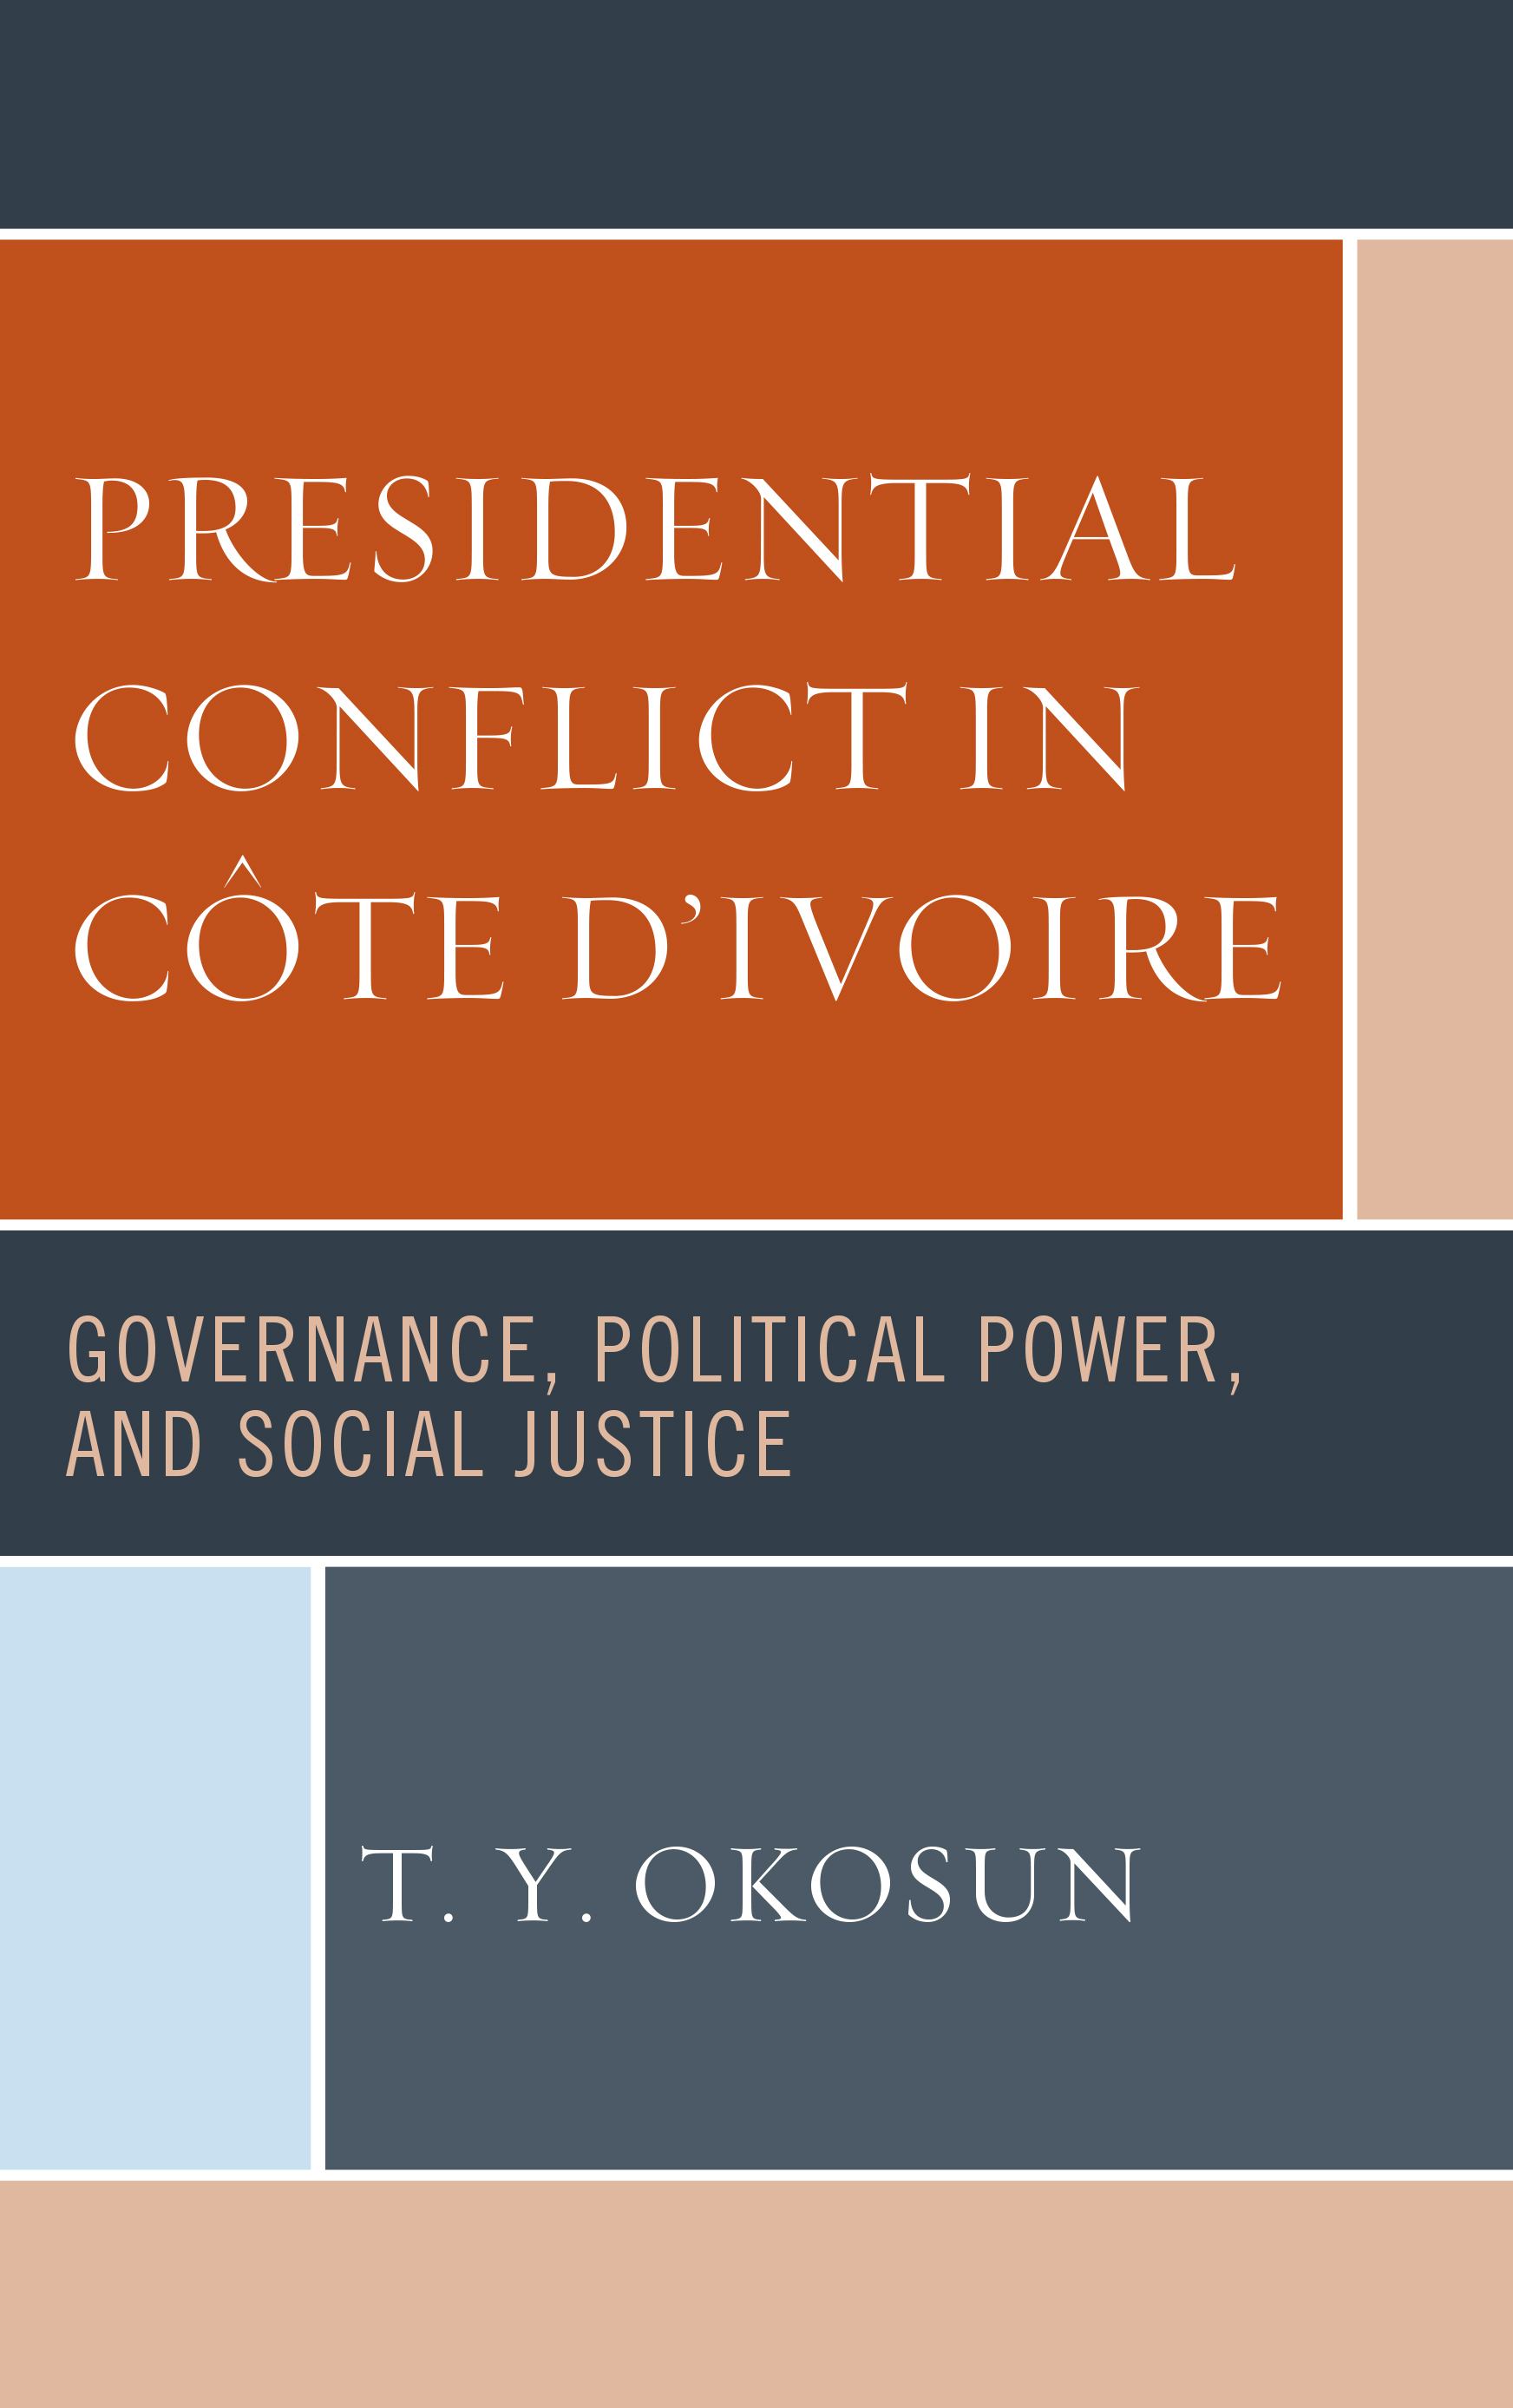 Presidential Conflict in Côte d’Ivoire: Governance, Political Power, and Social Justice